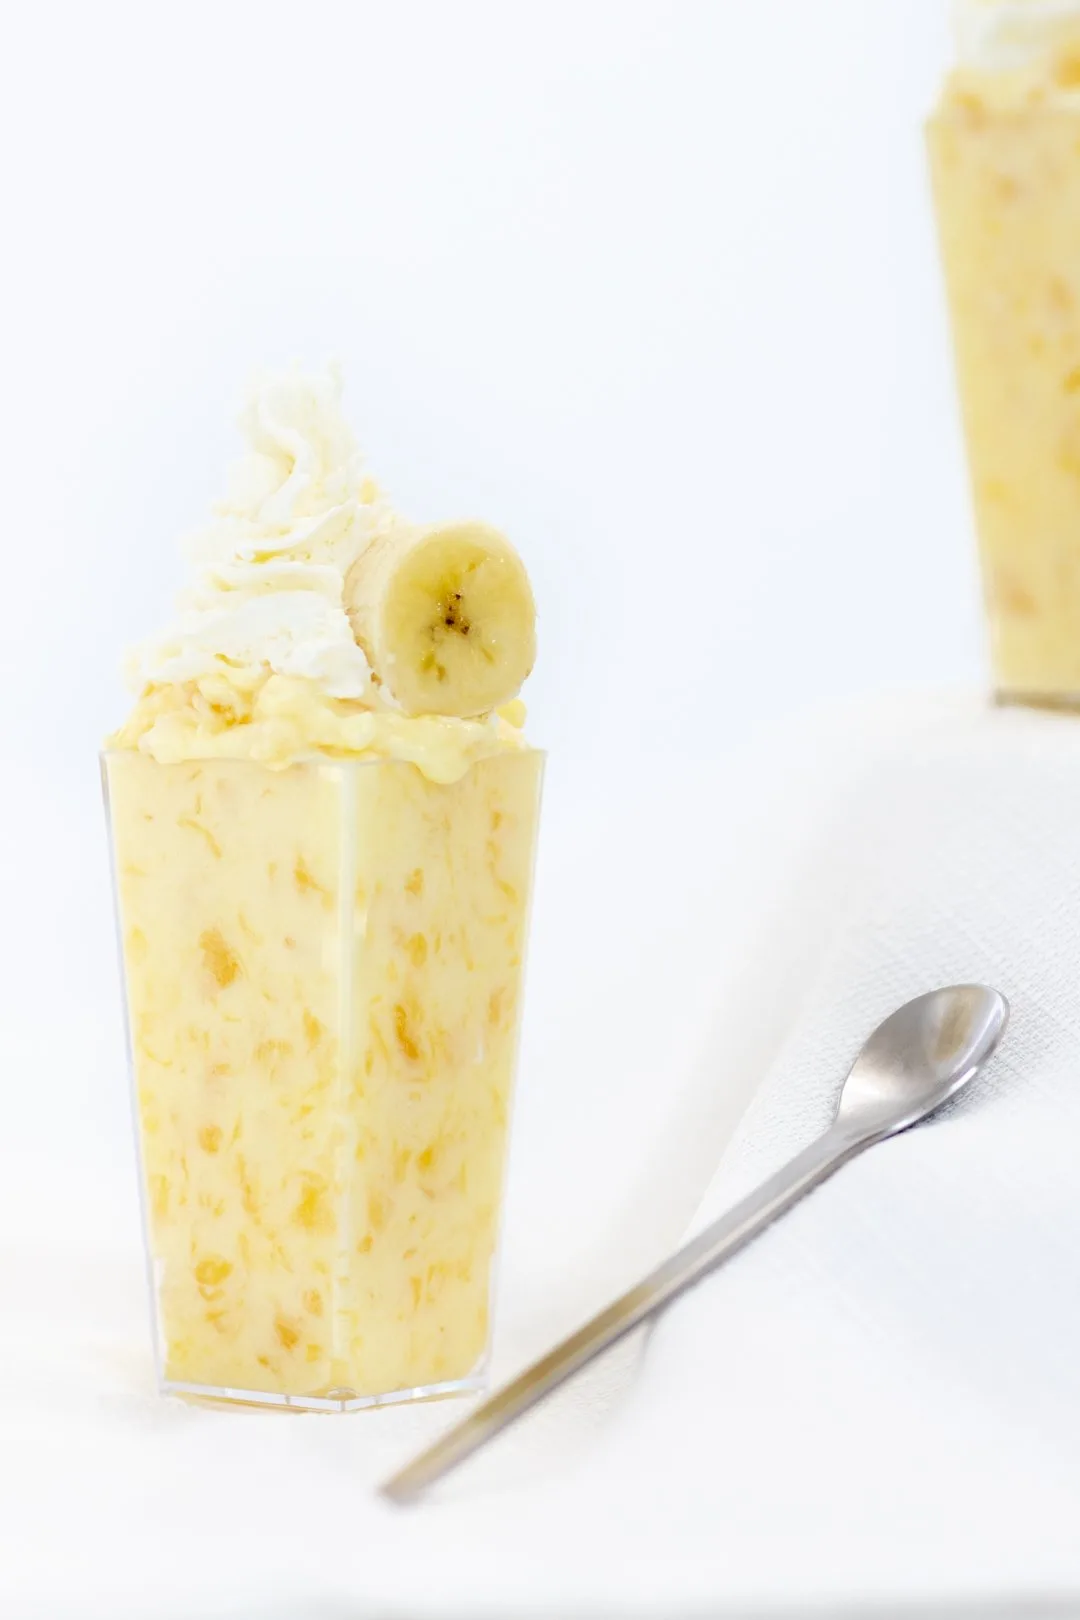 pineapple pudding topped with banana and whipped cream